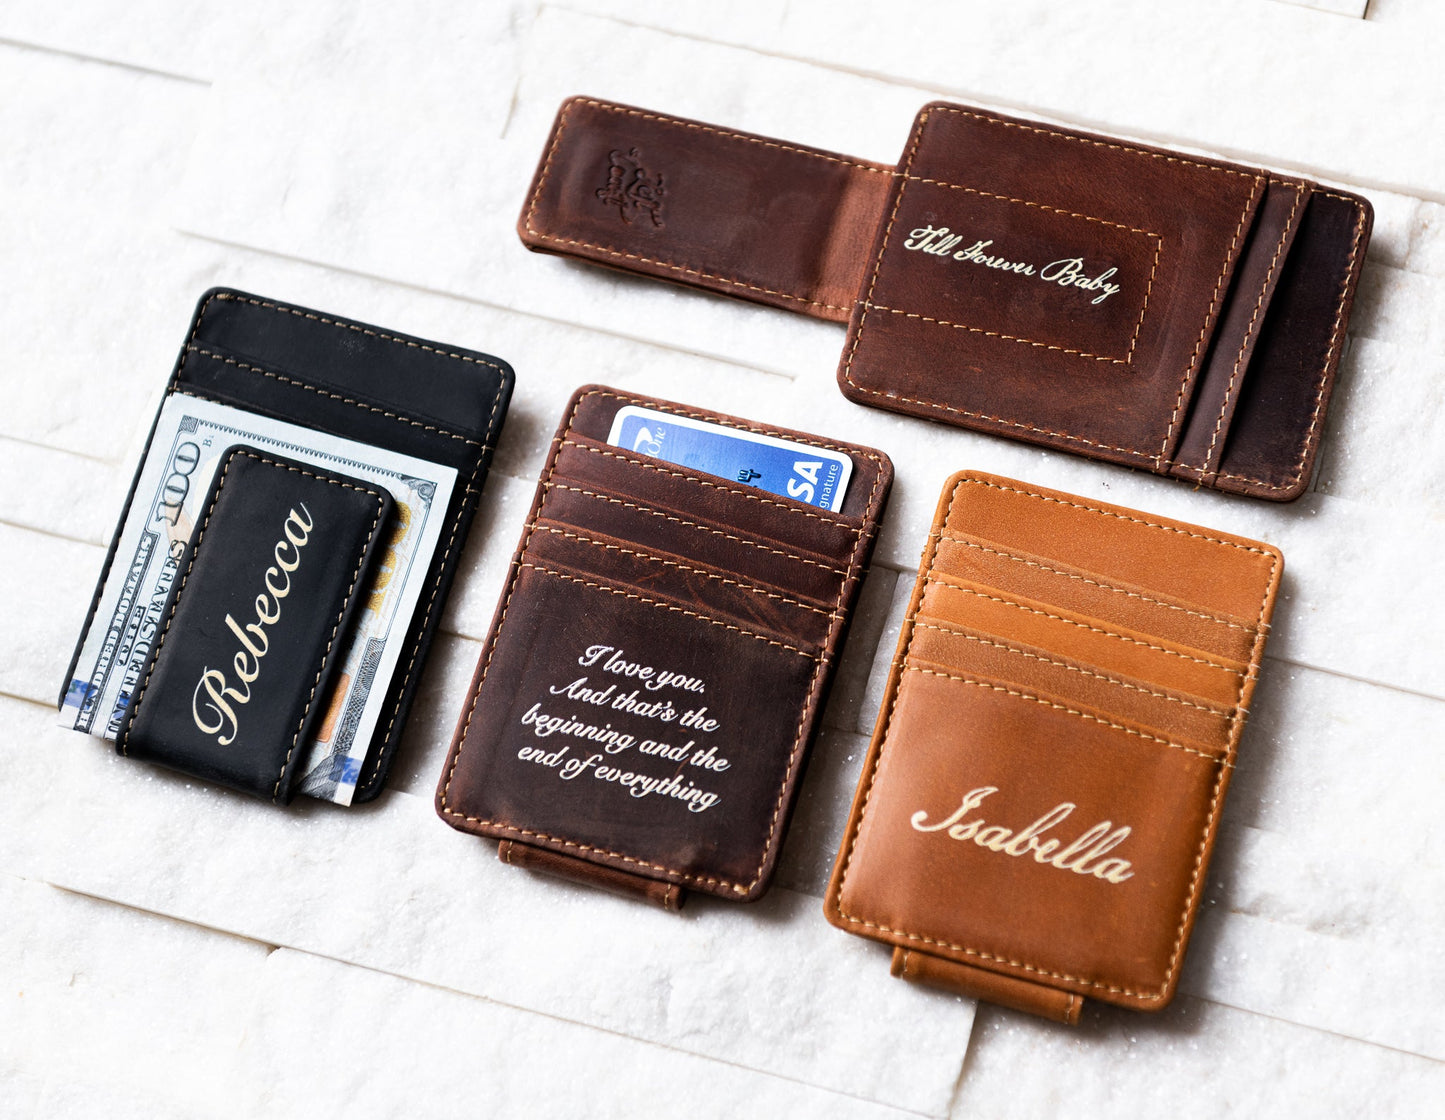 White Inked Message Leather Magnetic Money Clip